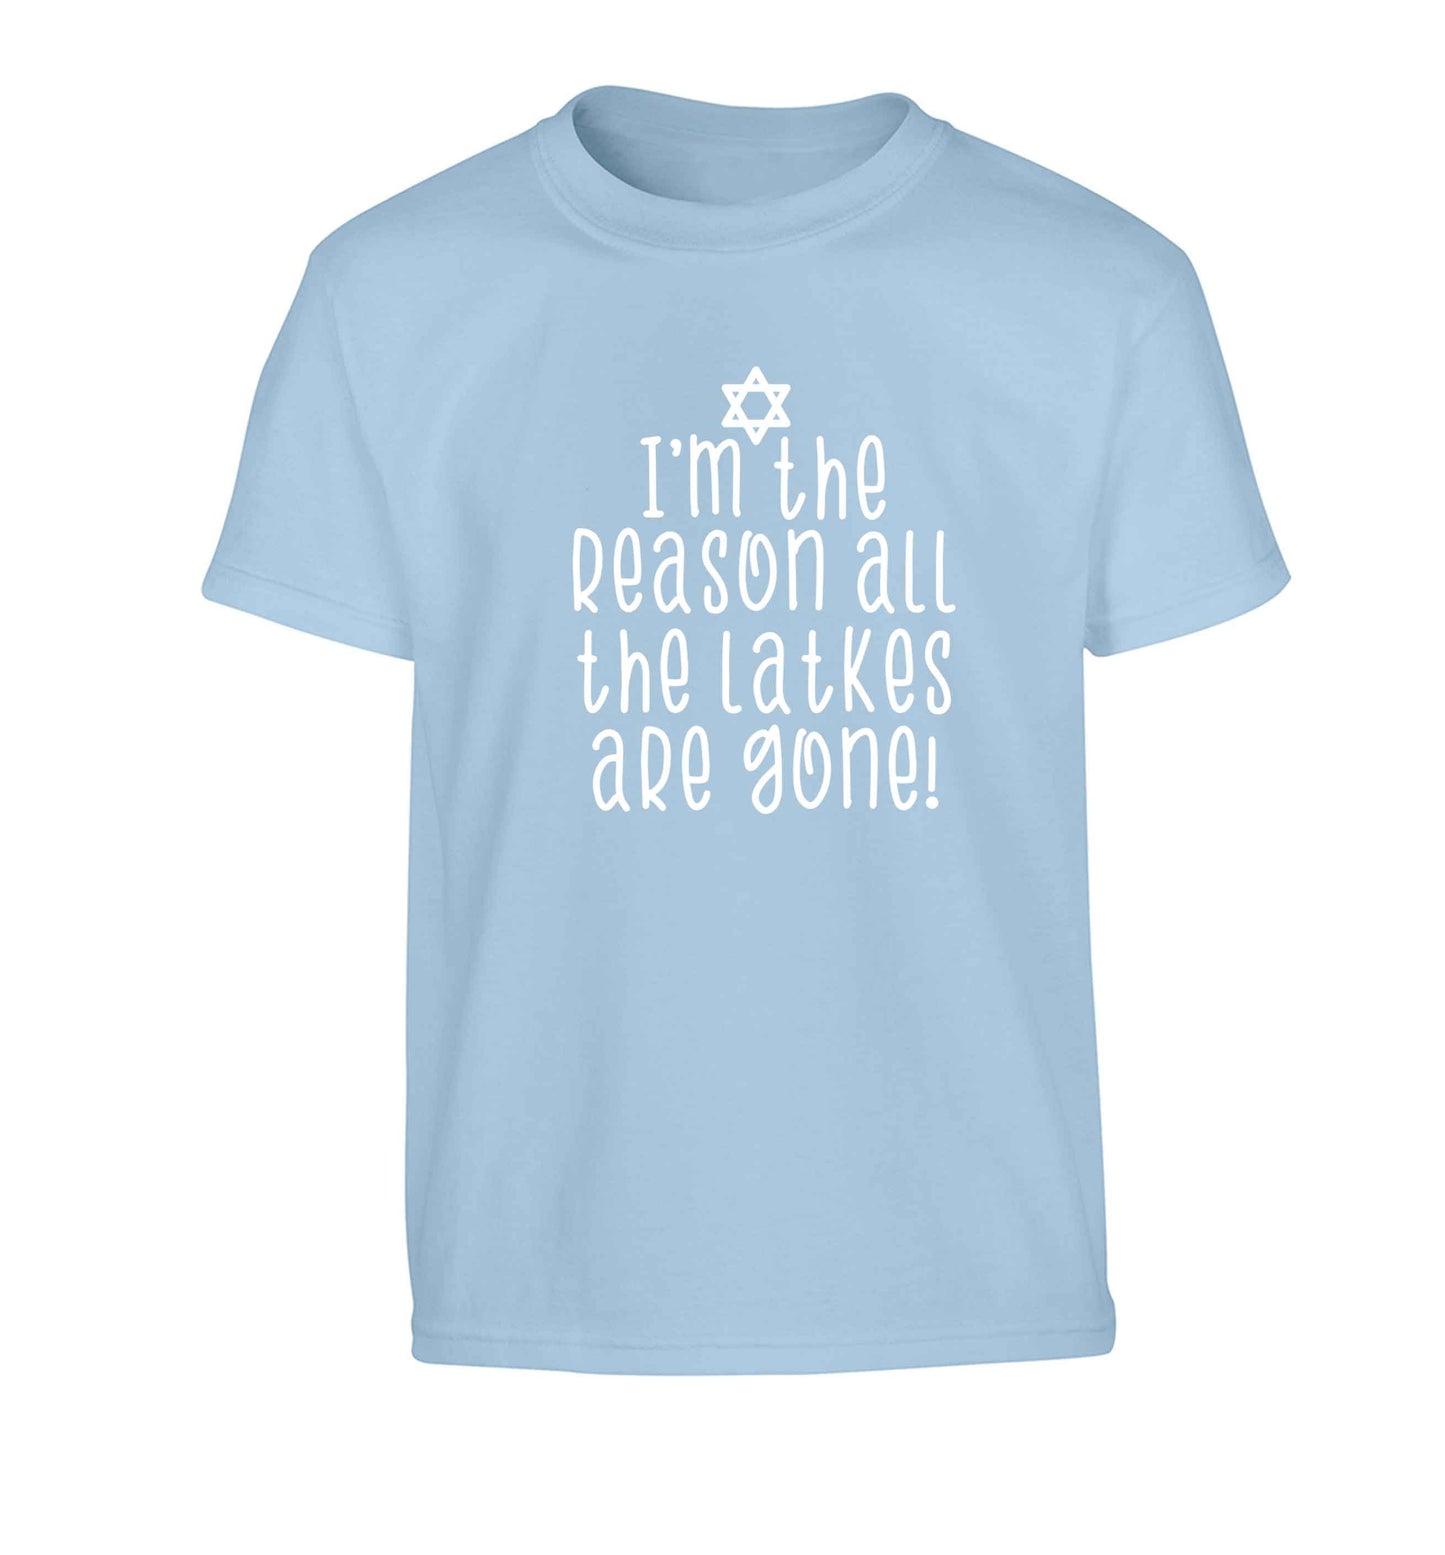 I'm the reason all the latkes are gone Children's light blue Tshirt 12-13 Years